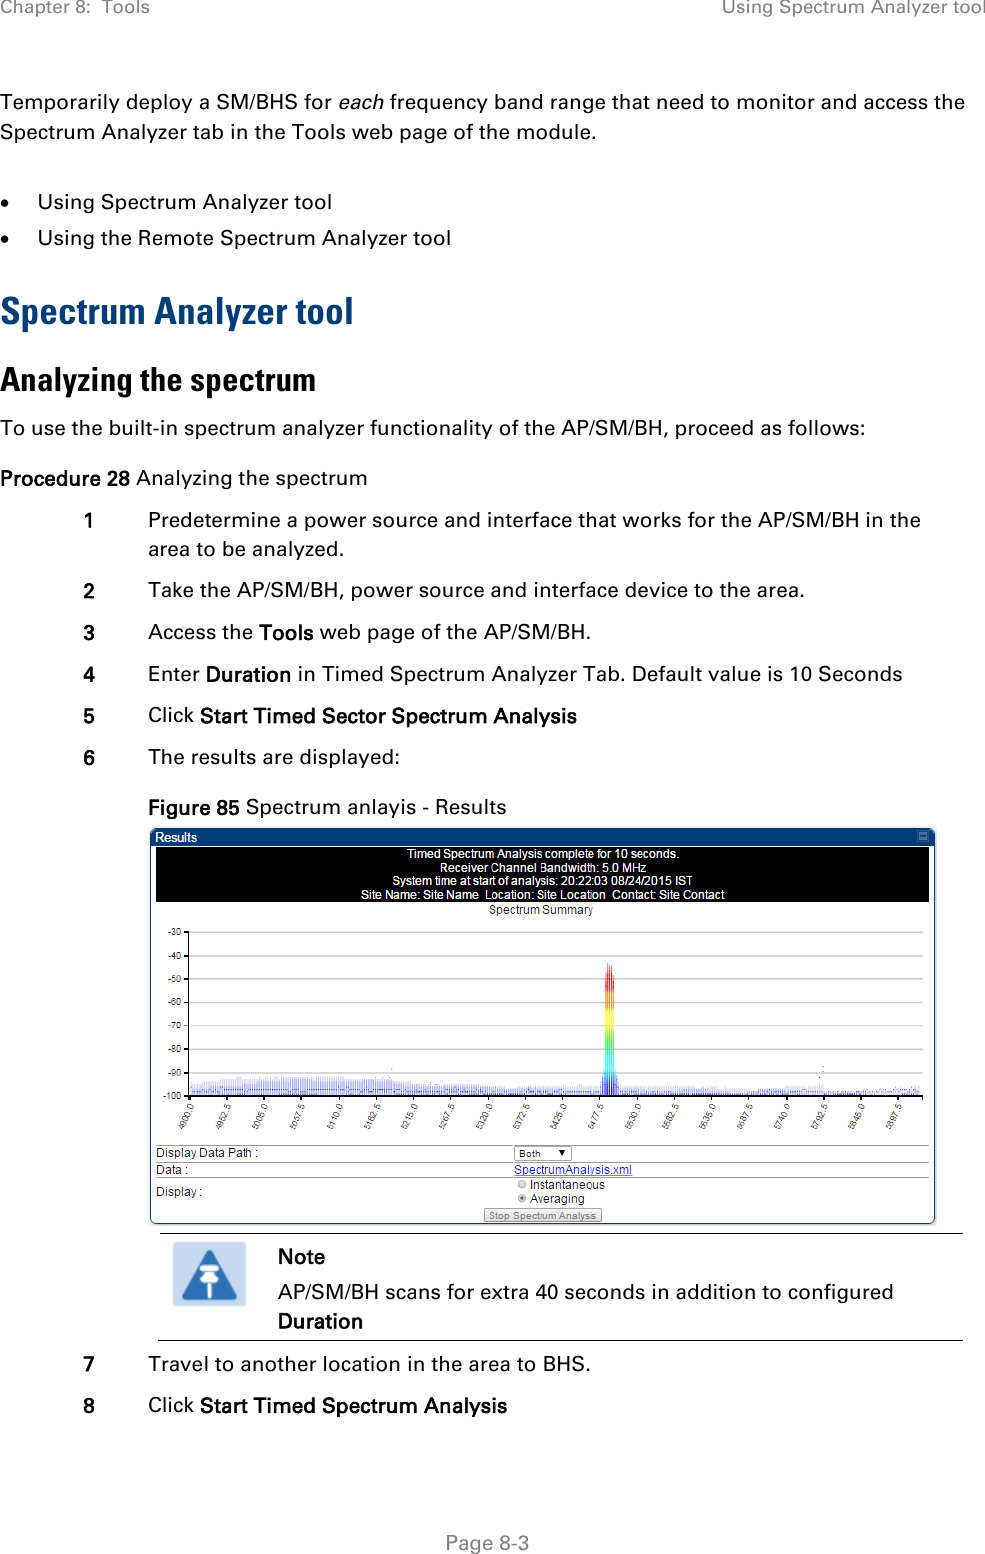 Chapter 8:  Tools Using Spectrum Analyzer tool   Page 8-3 Temporarily deploy a SM/BHS for each frequency band range that need to monitor and access the Spectrum Analyzer tab in the Tools web page of the module.   • Using Spectrum Analyzer tool • Using the Remote Spectrum Analyzer tool Spectrum Analyzer tool Analyzing the spectrum To use the built-in spectrum analyzer functionality of the AP/SM/BH, proceed as follows: Procedure 28 Analyzing the spectrum 1 Predetermine a power source and interface that works for the AP/SM/BH in the area to be analyzed. 2 Take the AP/SM/BH, power source and interface device to the area. 3 Access the Tools web page of the AP/SM/BH. 4 Enter Duration in Timed Spectrum Analyzer Tab. Default value is 10 Seconds 5 Click Start Timed Sector Spectrum Analysis 6 The results are displayed: Figure 85 Spectrum anlayis - Results   Note AP/SM/BH scans for extra 40 seconds in addition to configured Duration  7 Travel to another location in the area to BHS. 8 Click Start Timed Spectrum Analysis 